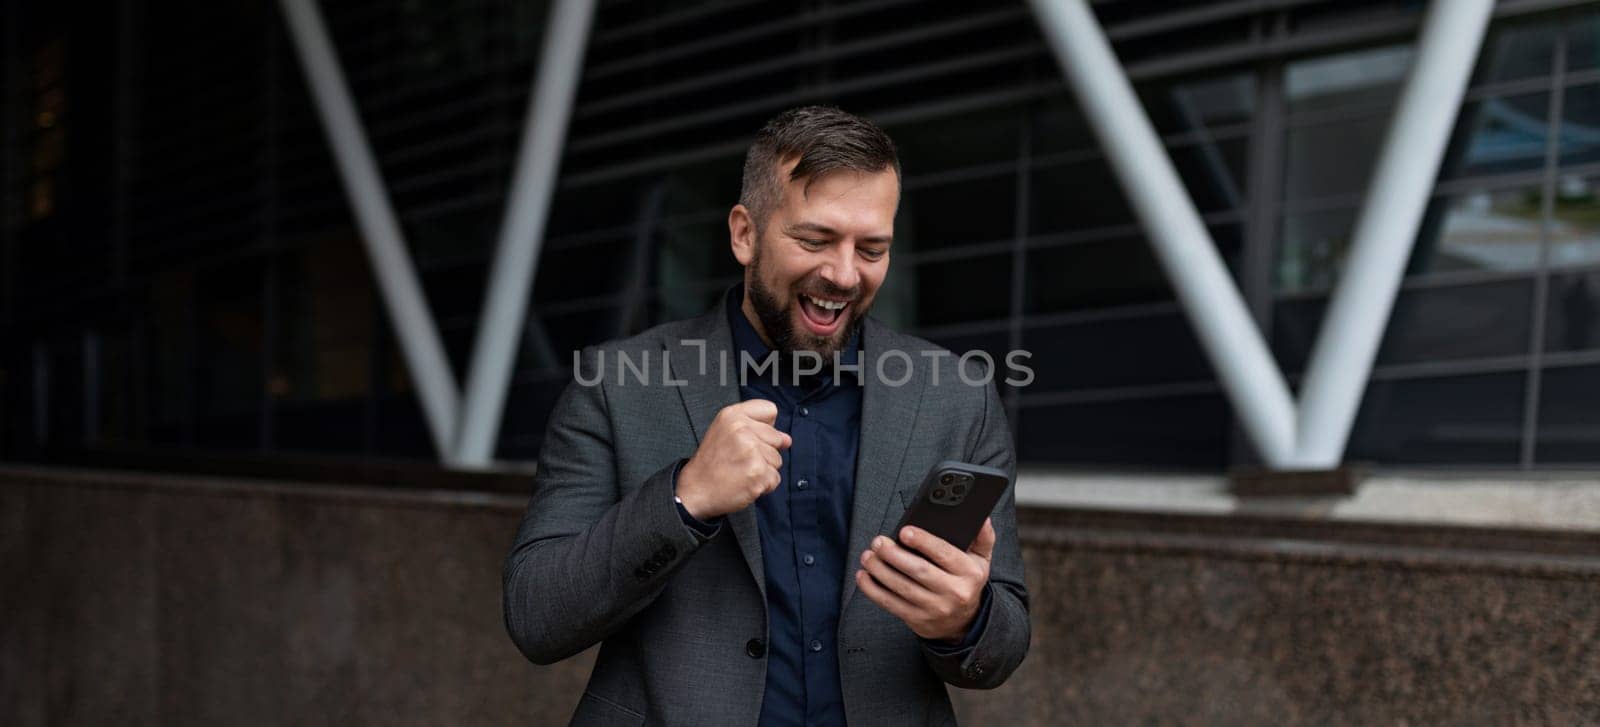 happy freelancer man with a smartphone in his hands smiling against the backdrop of the building by TRMK